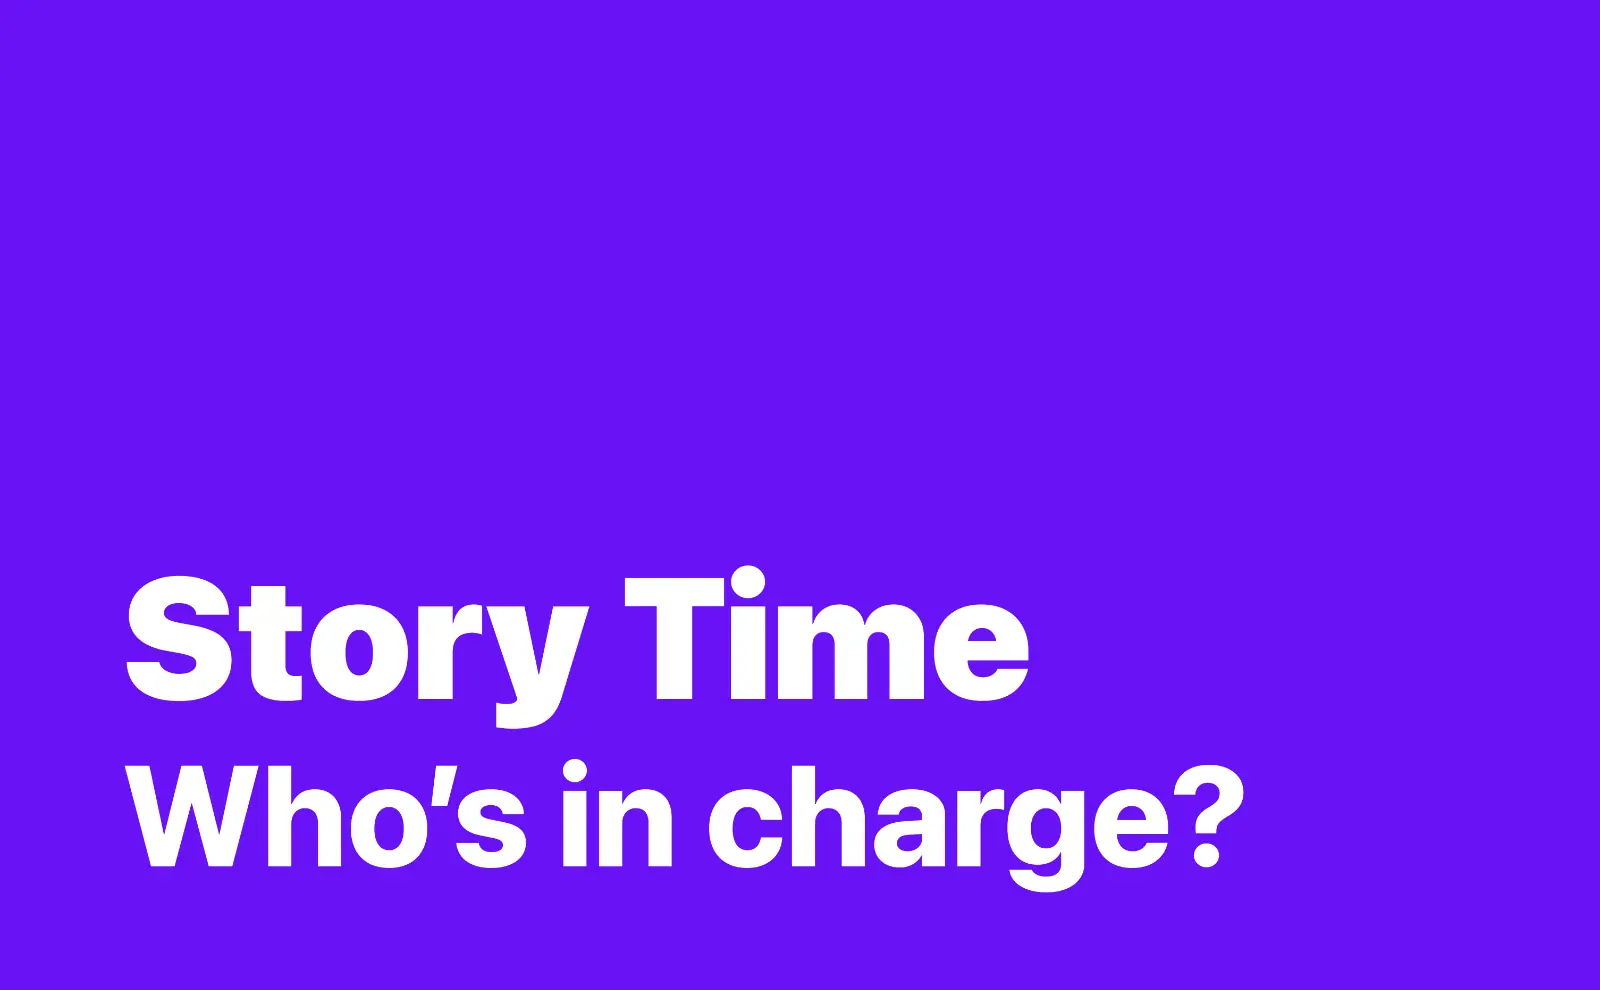 Story Time: Who's in charge?